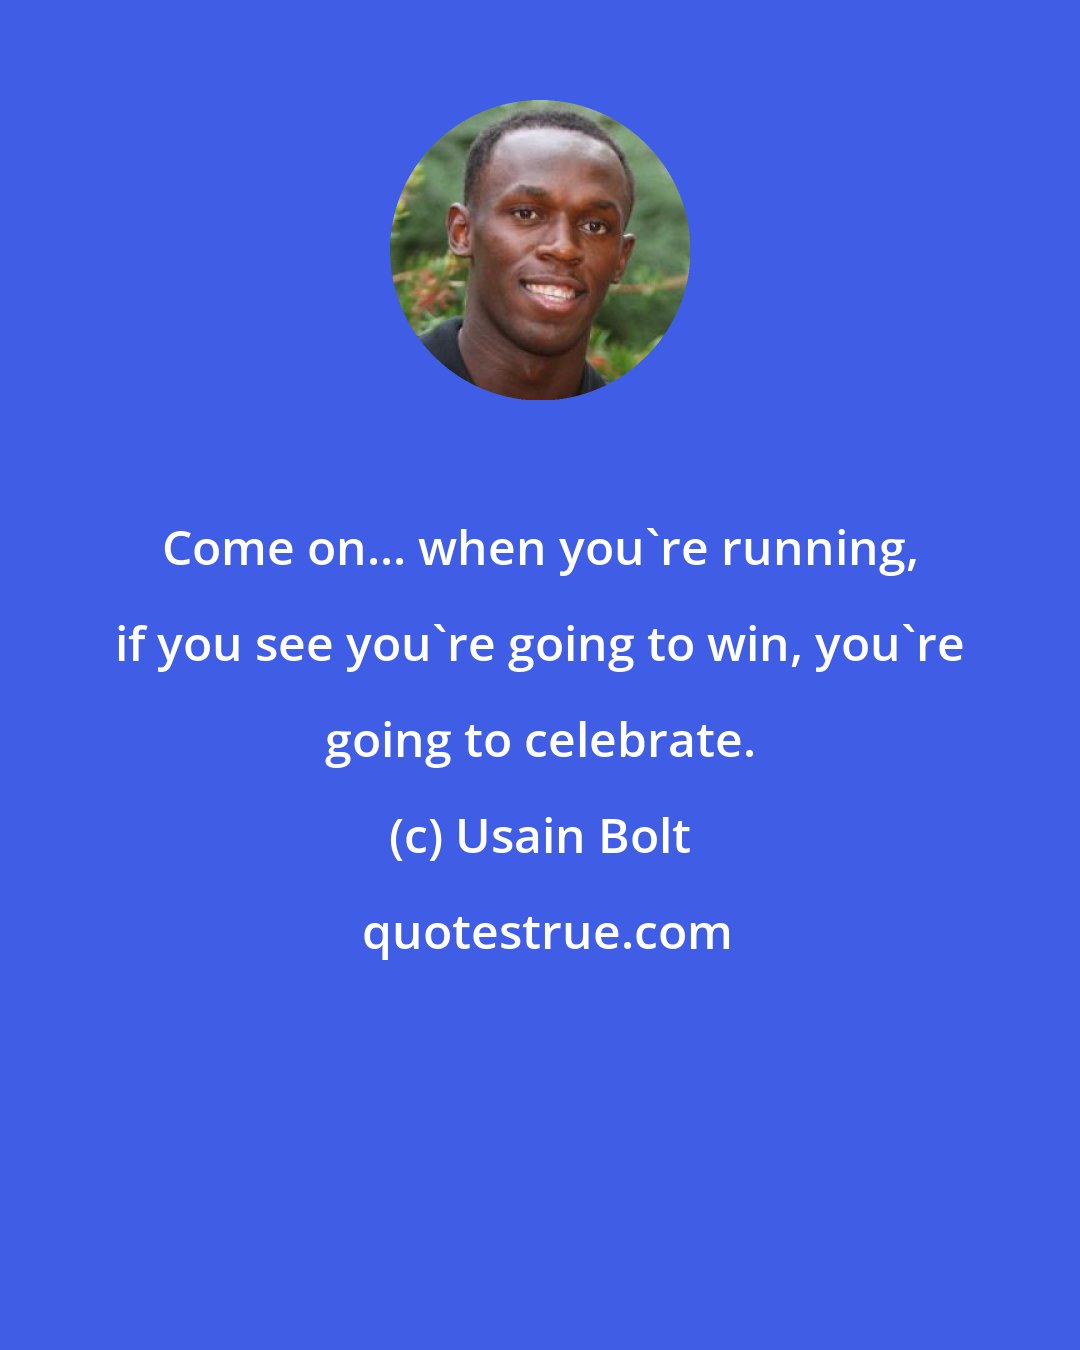 Usain Bolt: Come on... when you're running, if you see you're going to win, you're going to celebrate.